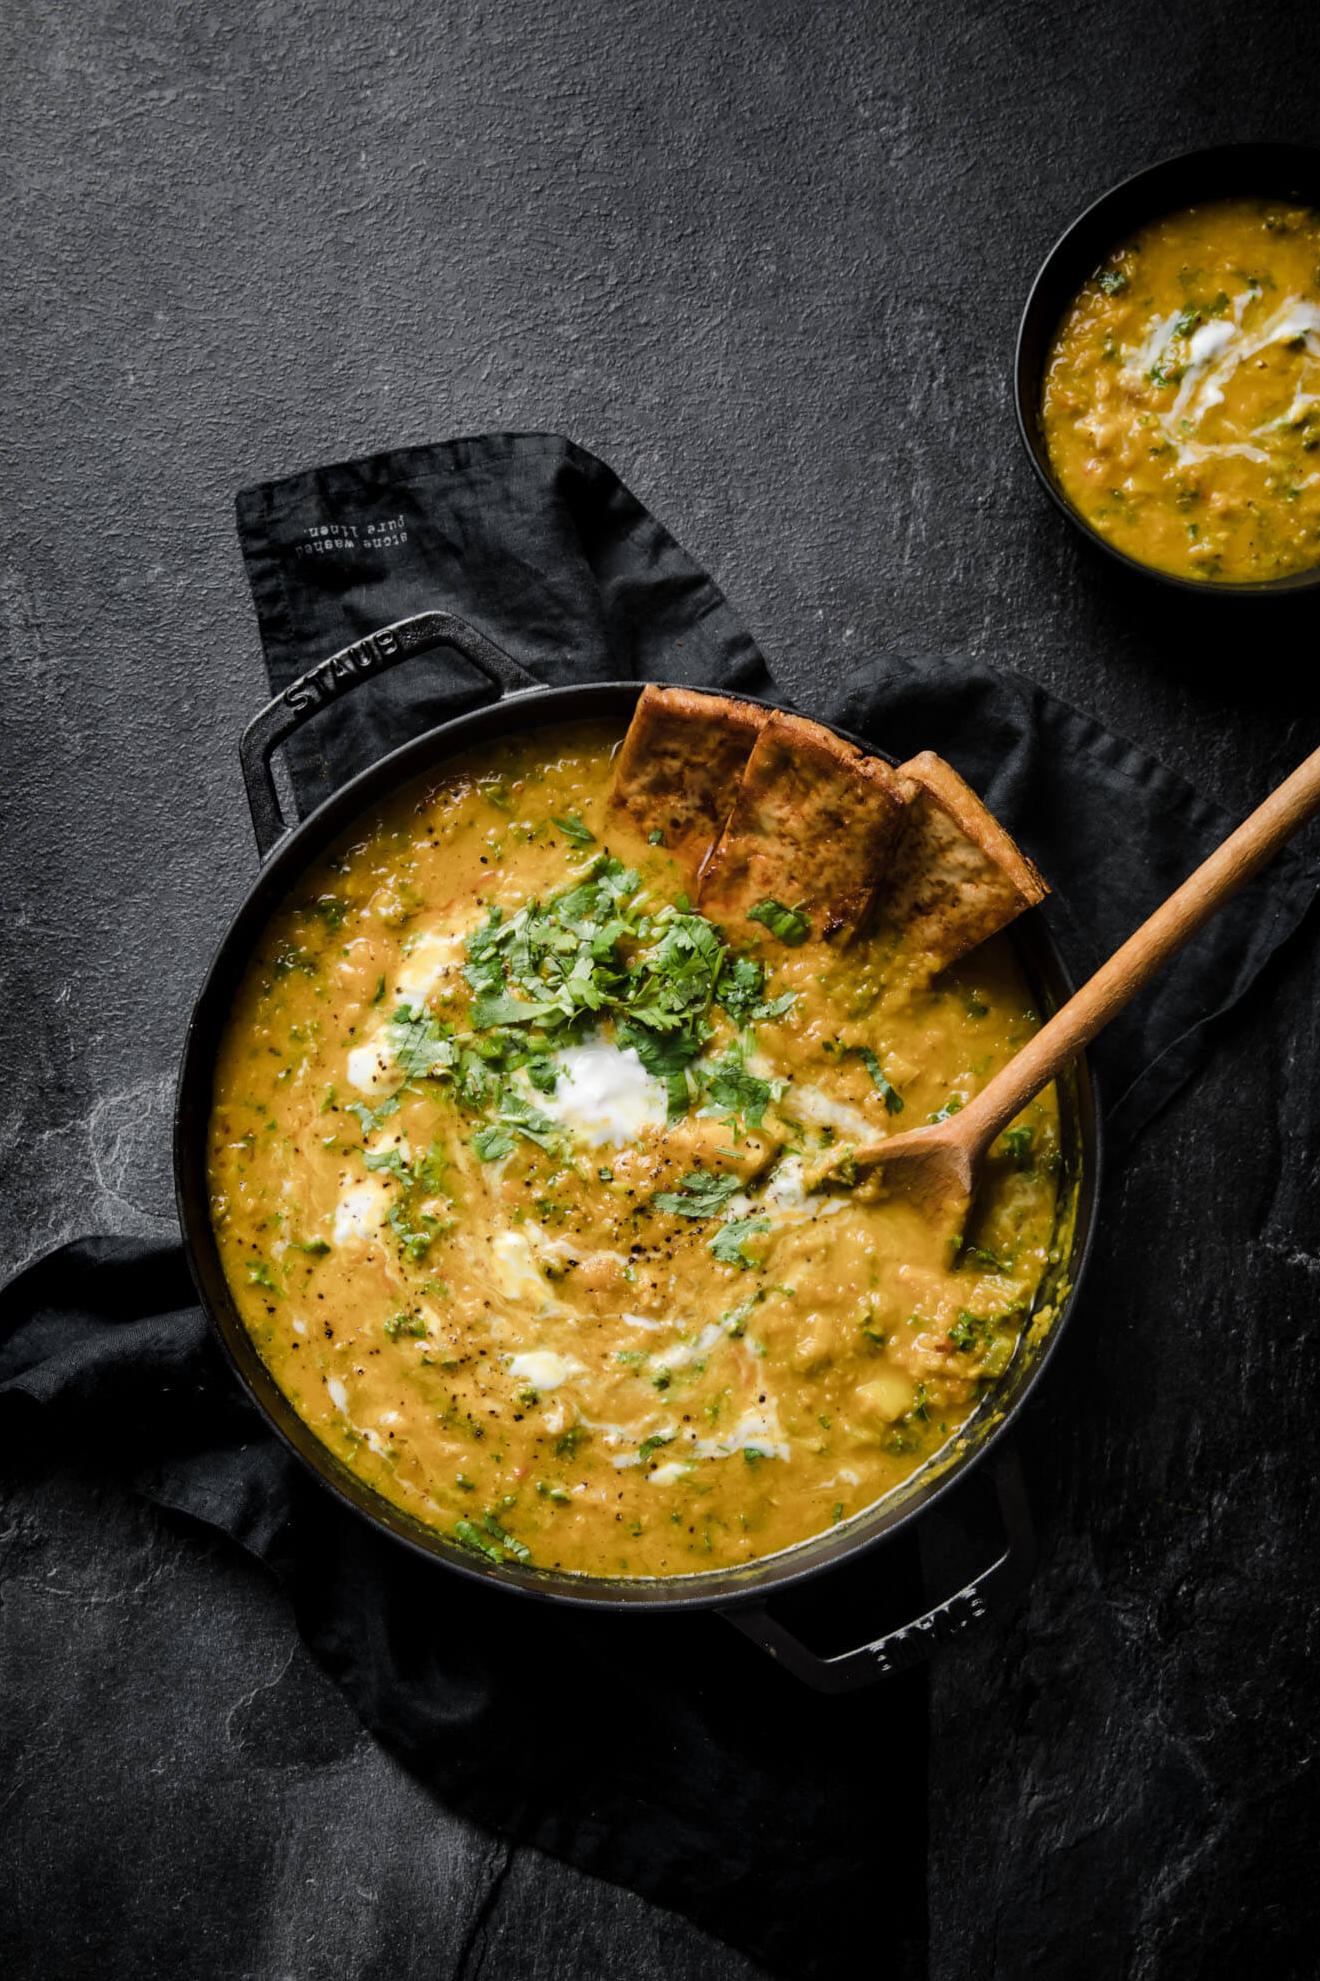  A warm bowl of comfort on a cold day – Lentil Tofu Soup